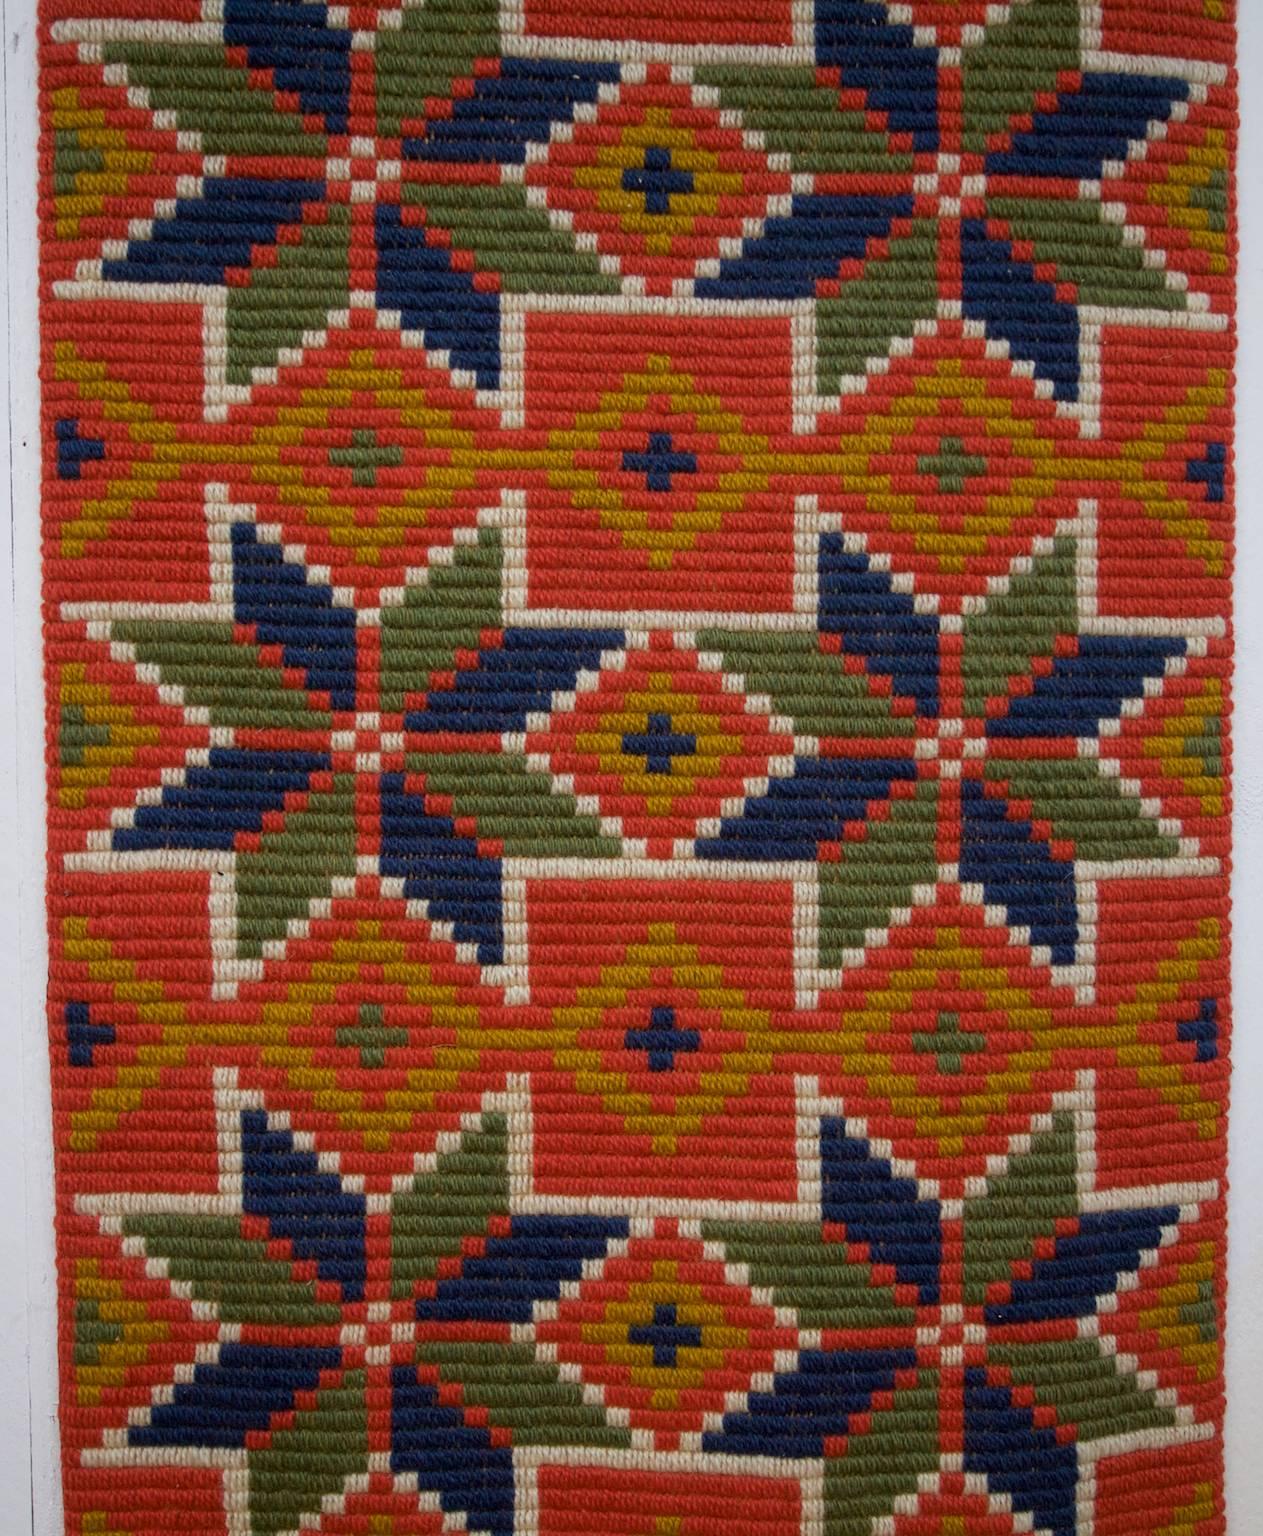 Hand-Woven  Traditional Large Handwoven Wool Wall Hanging from Skåne in South of Sweden   For Sale